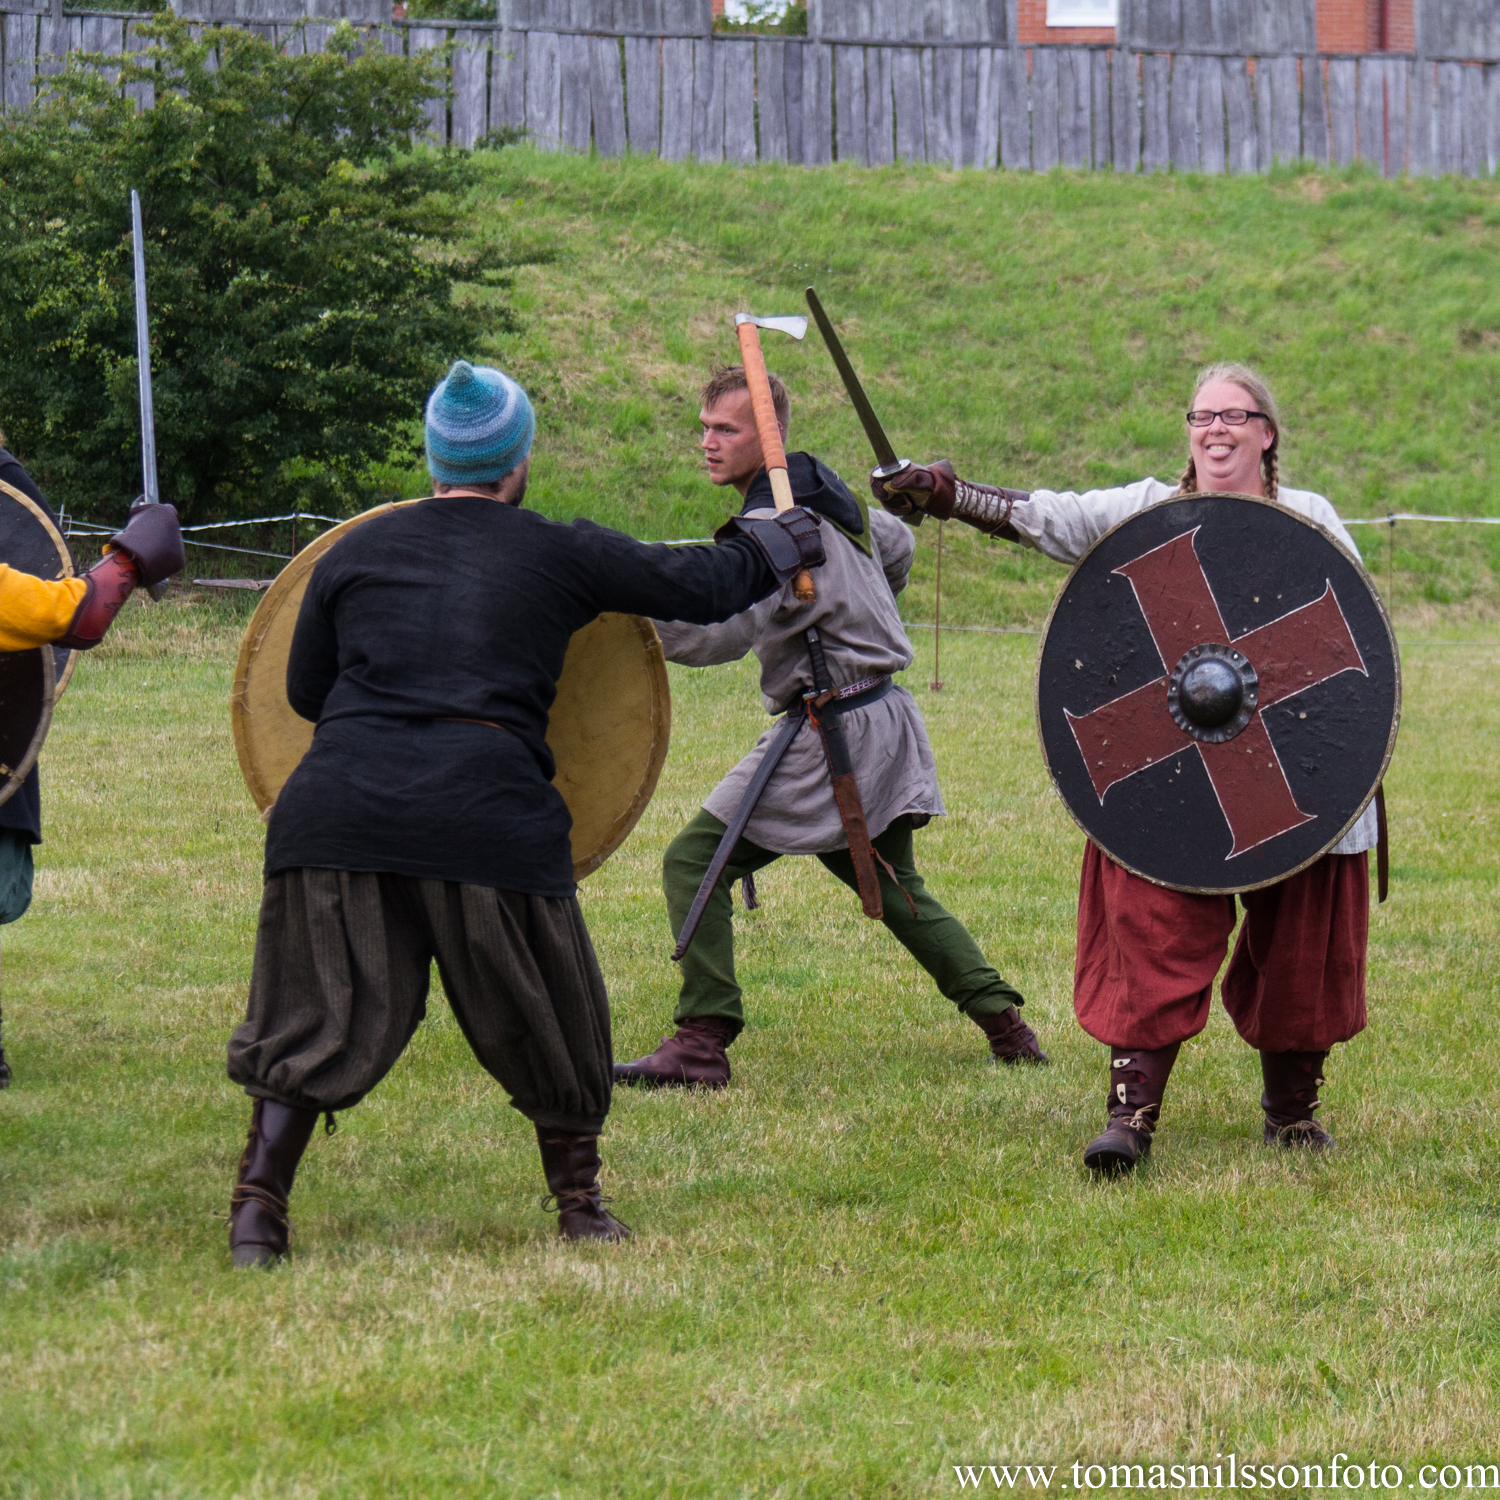 Day 189 - July 8: Being a Viking is serious business!